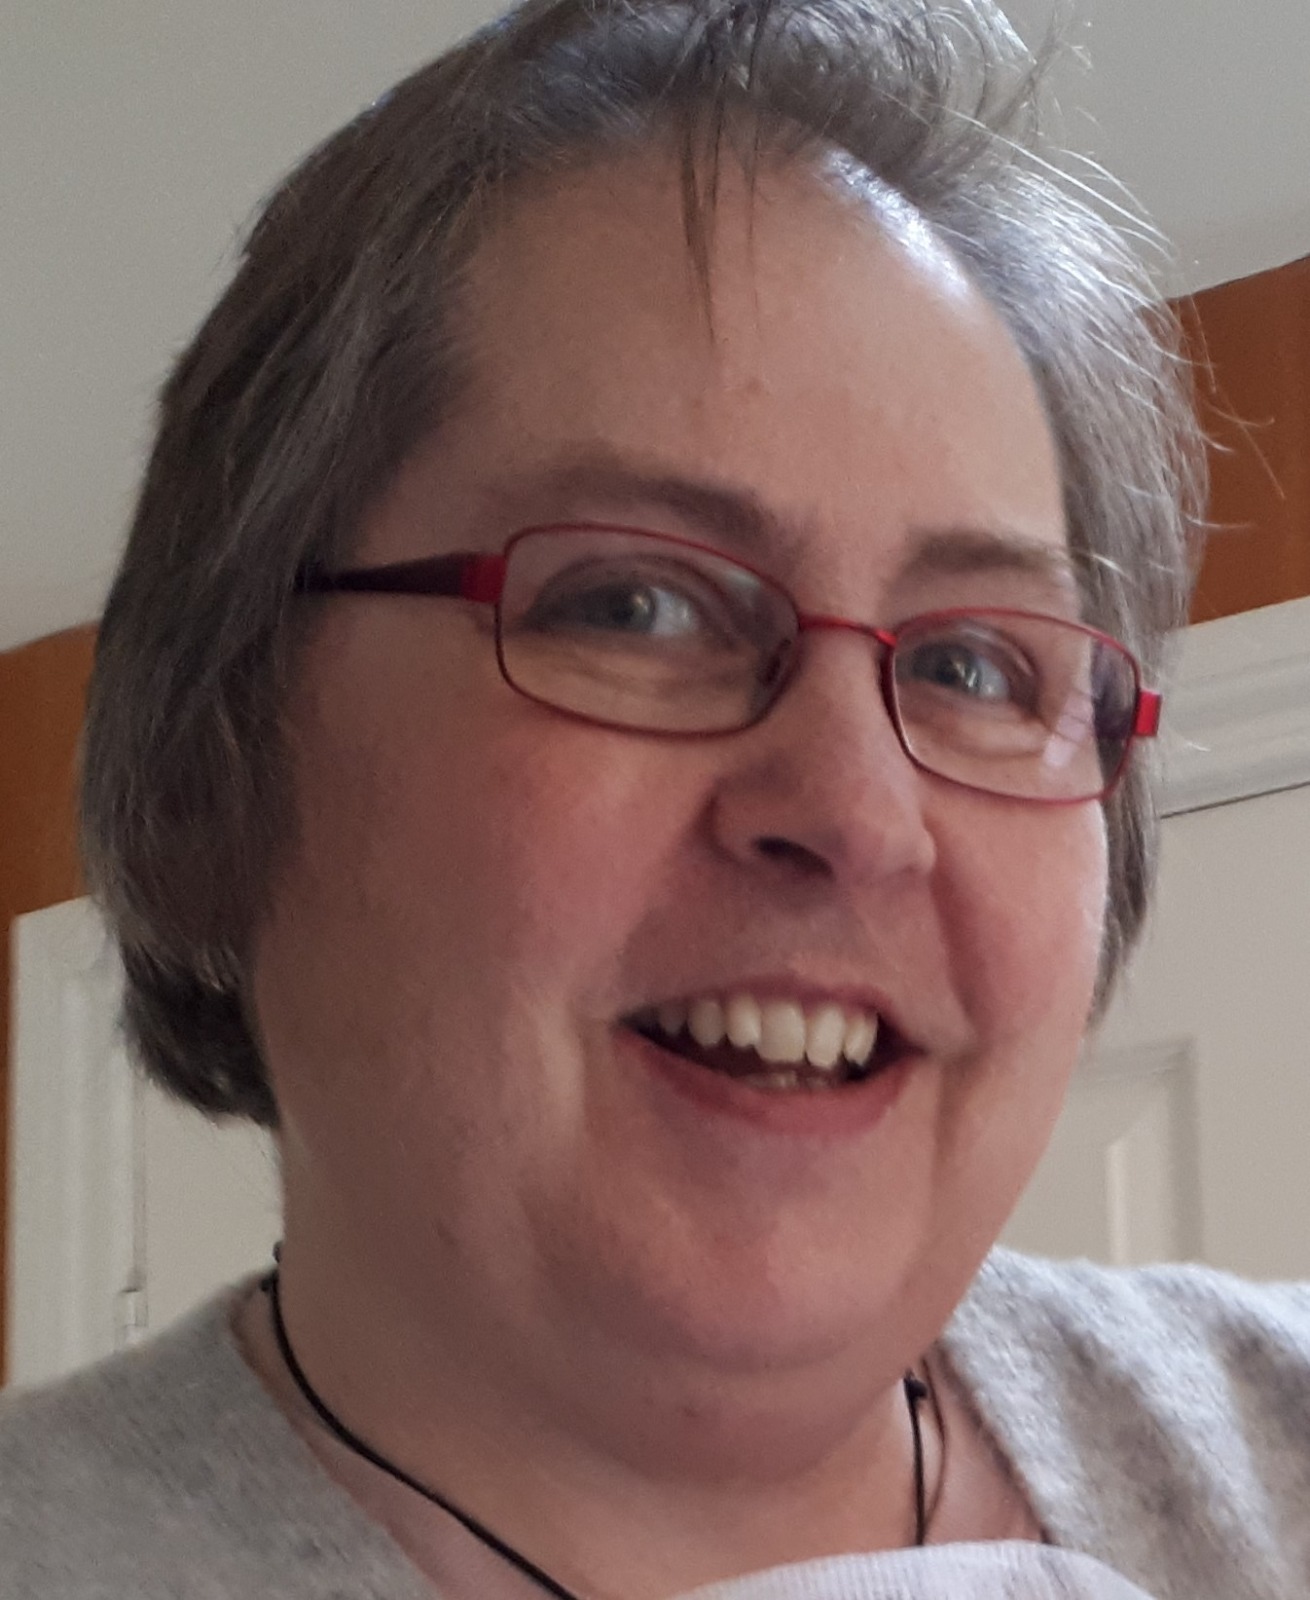 A woman with short grey hair, wearing glasses.